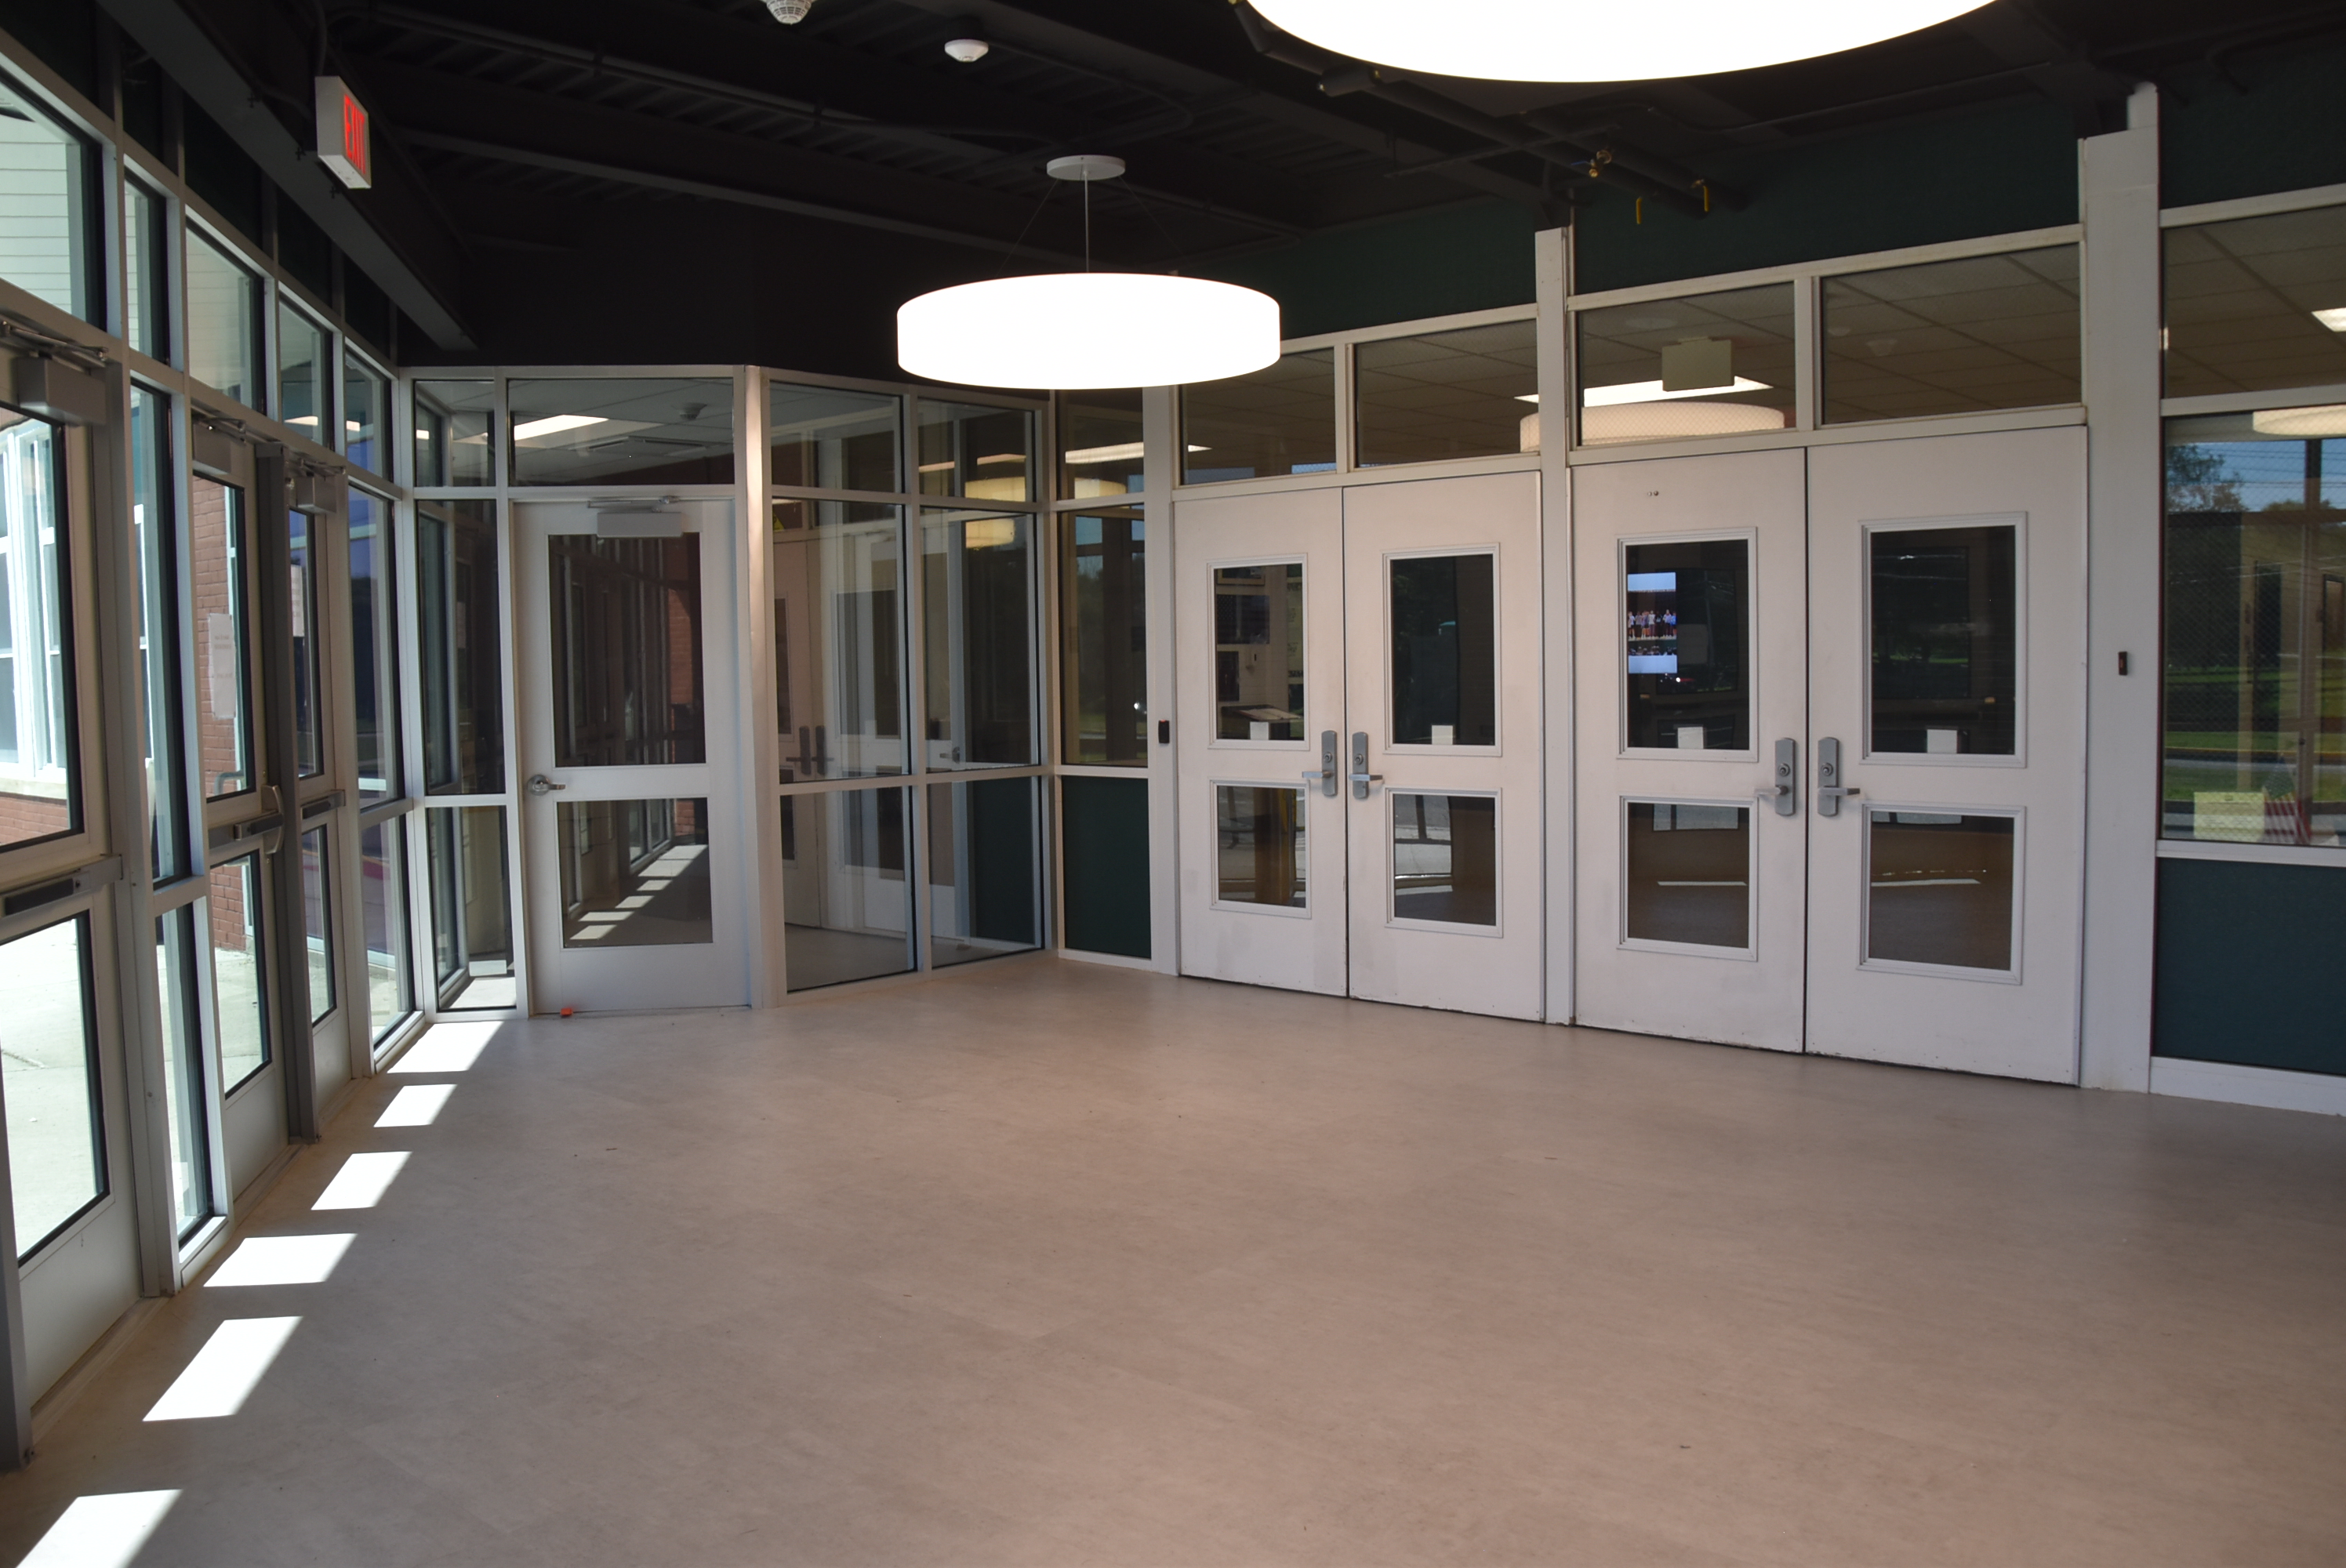 Security Vestibules are proposed for the 5 remaining schools. Lazar and Cedar Hill had security vestibules built out of the regular operating budget.